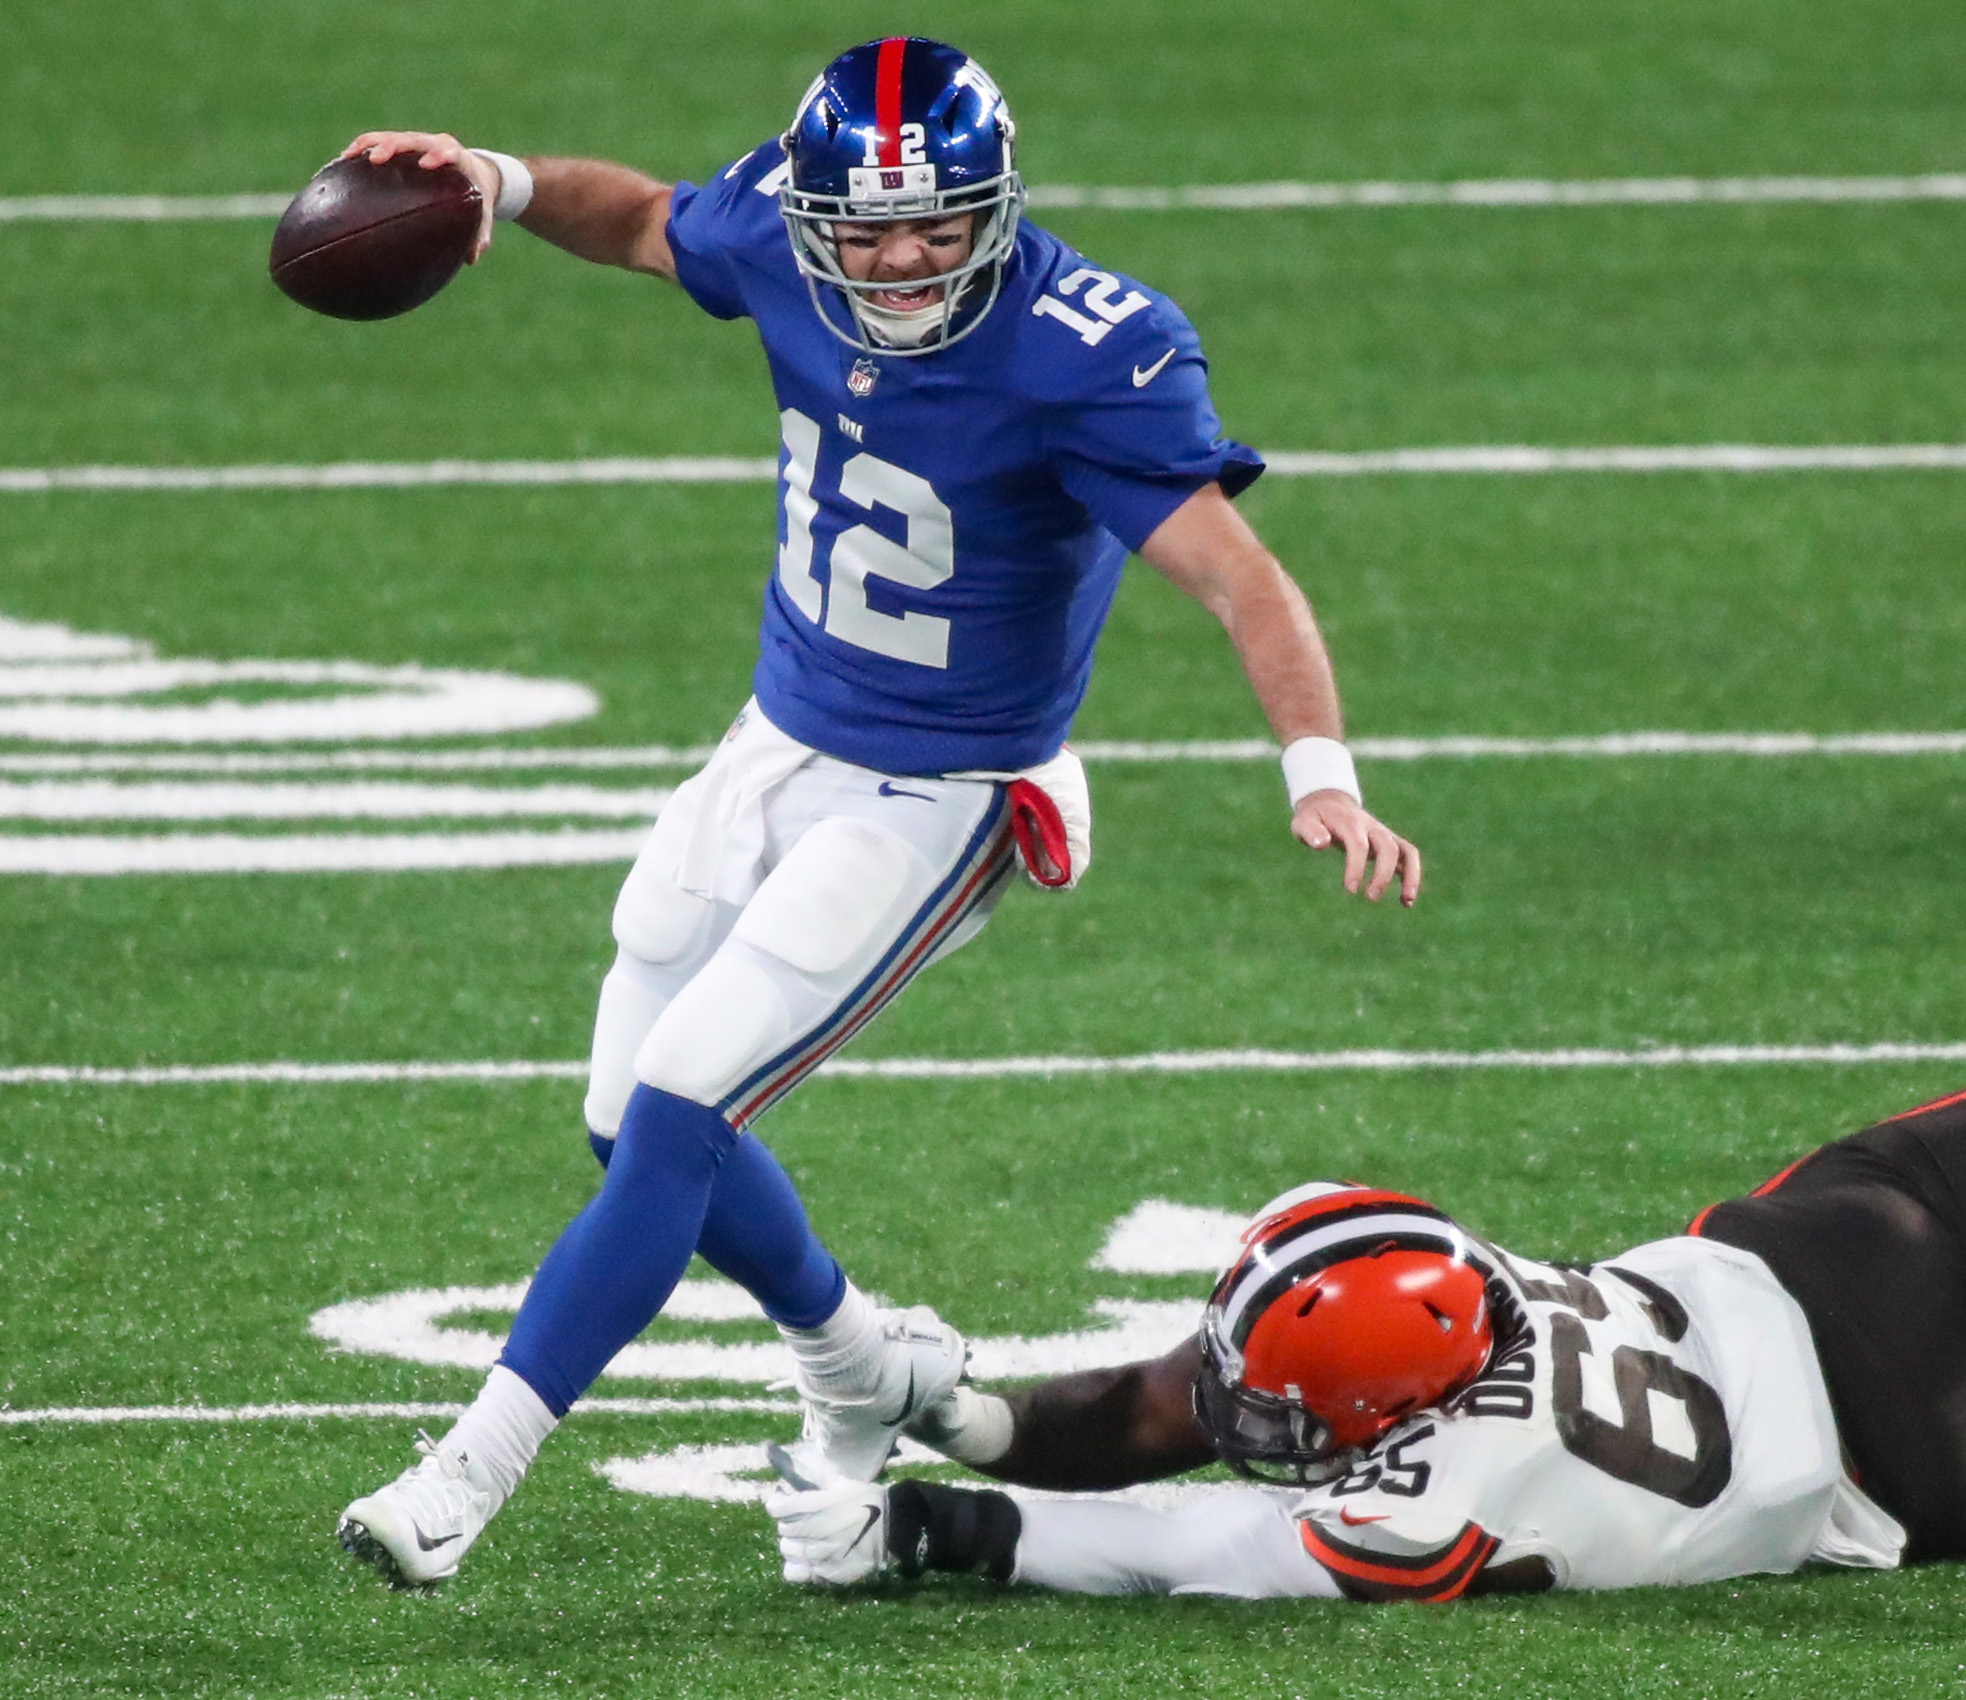 NFL playoff picture: Clinching scenarios for the Giants